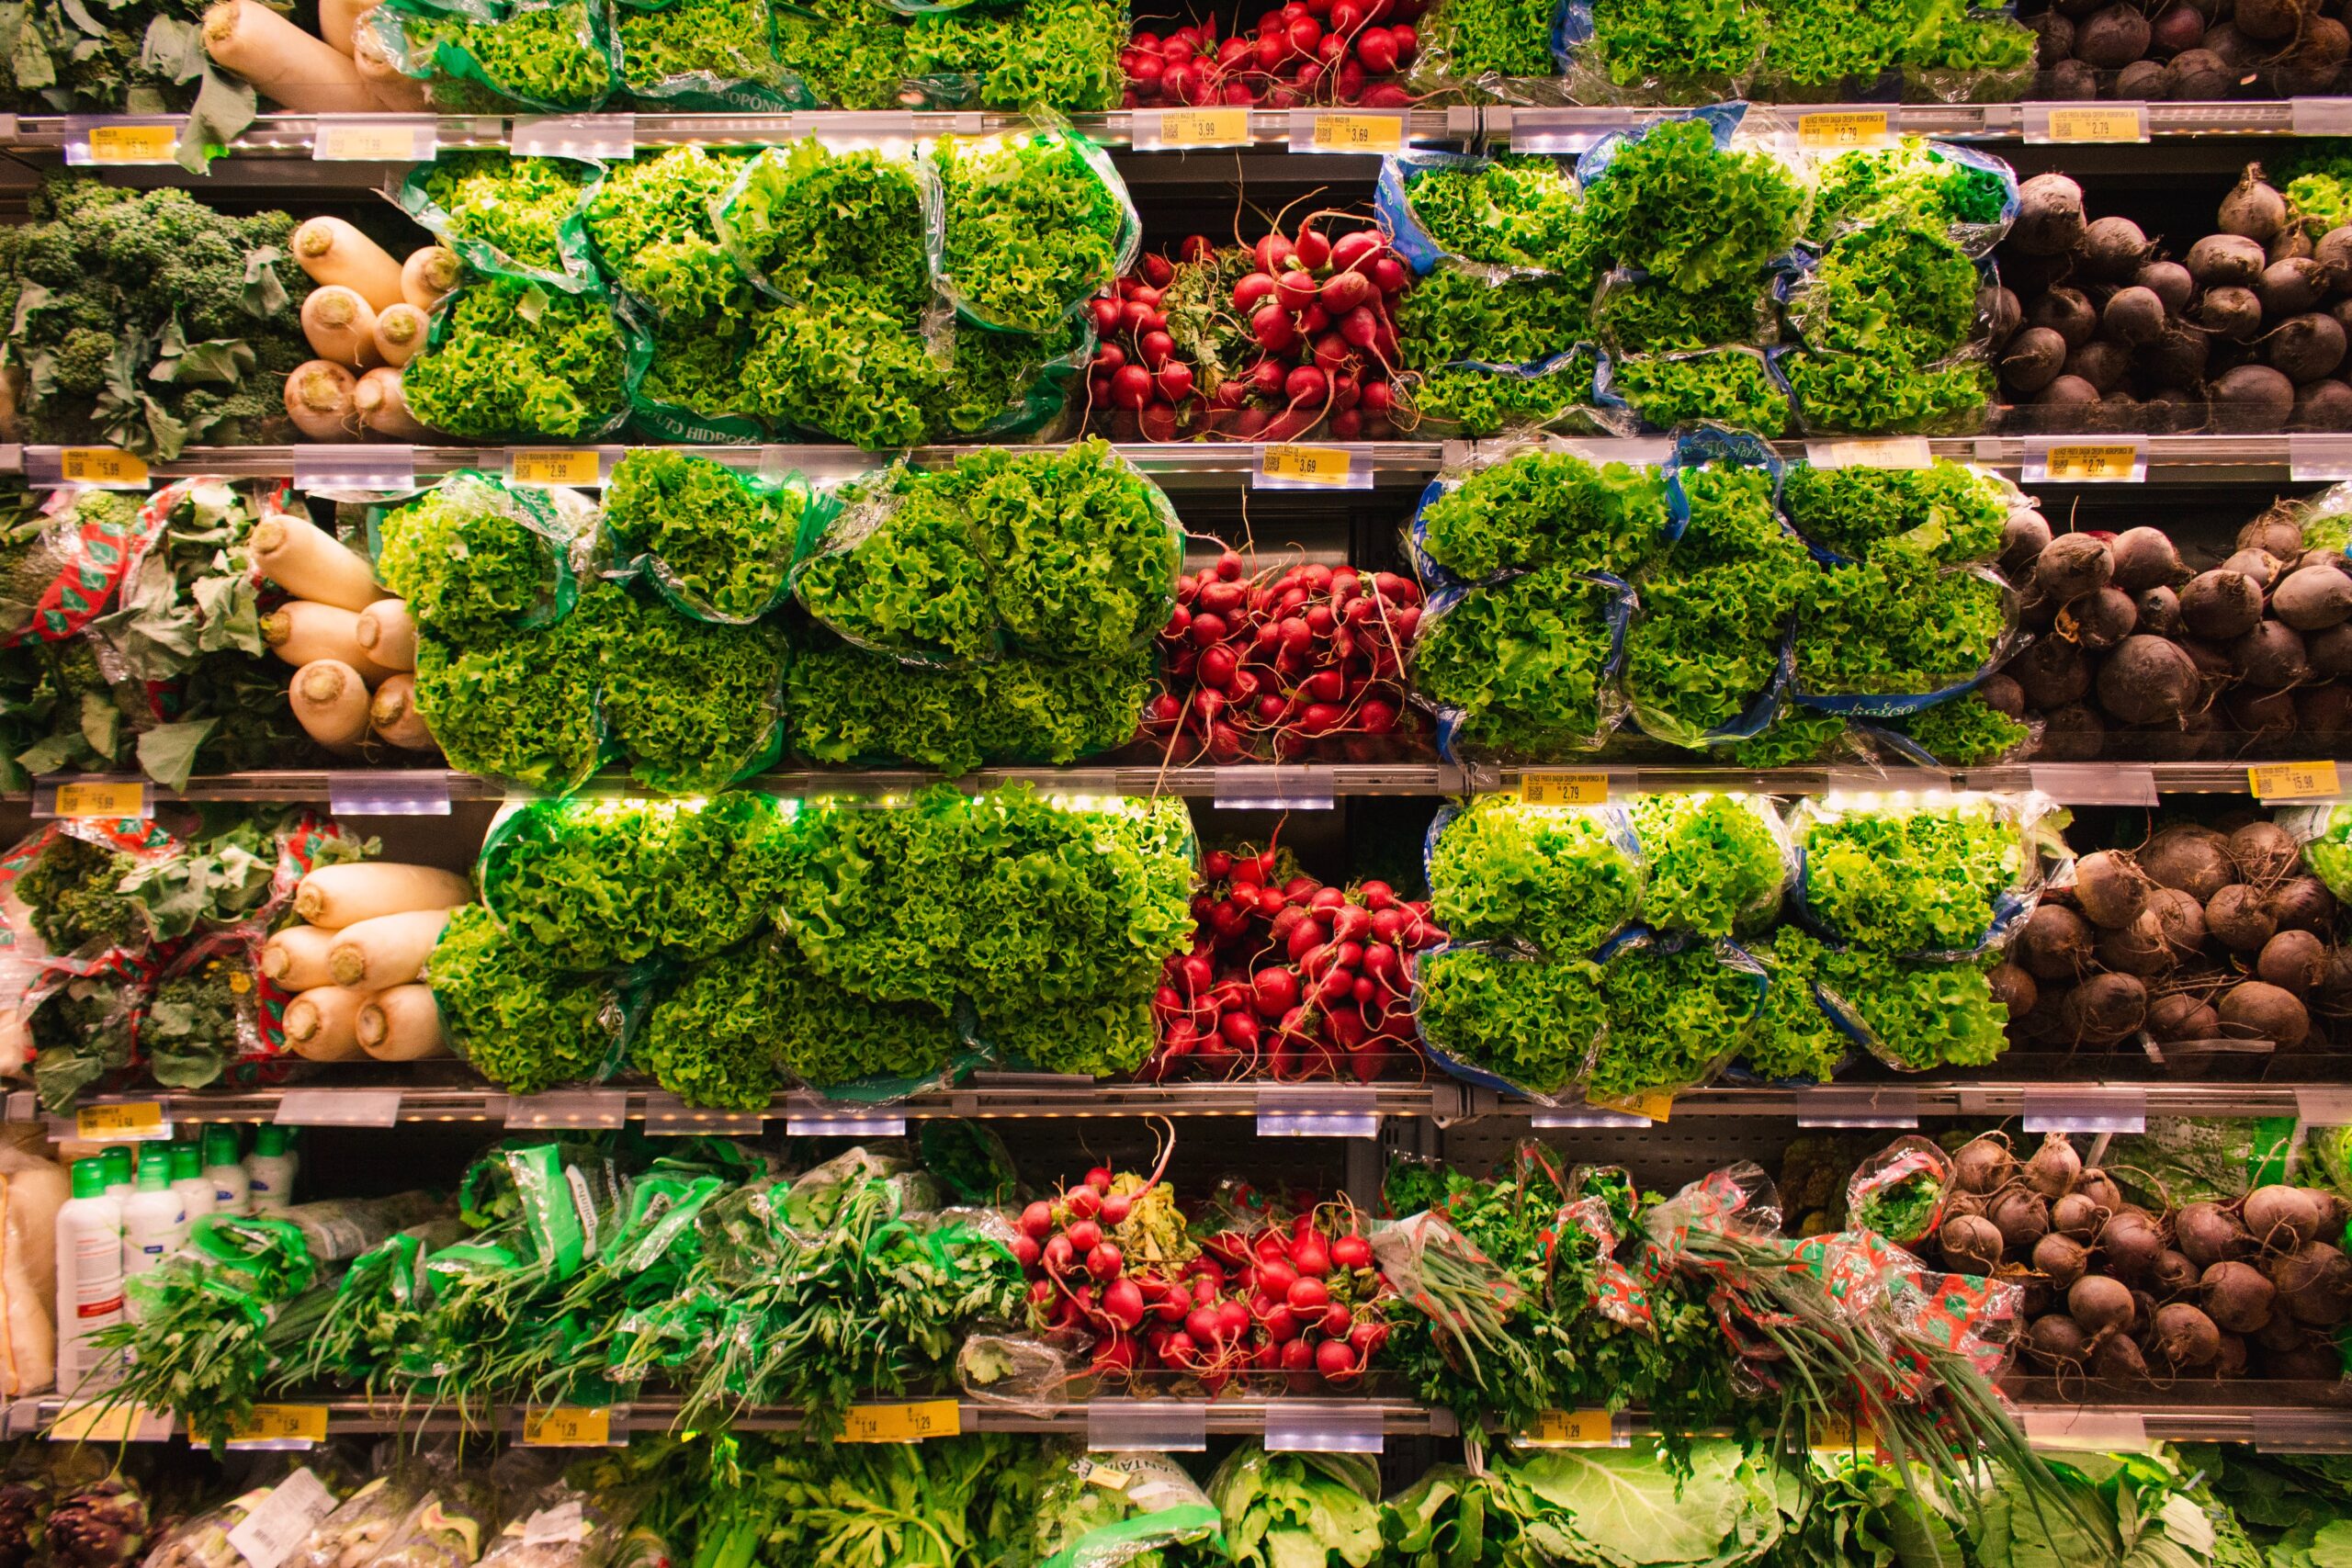 Instacart sign-up is simple and only takes a few minutes. After that, happy virtual shopping! Pictured: The vegetable isle of a grocery store.